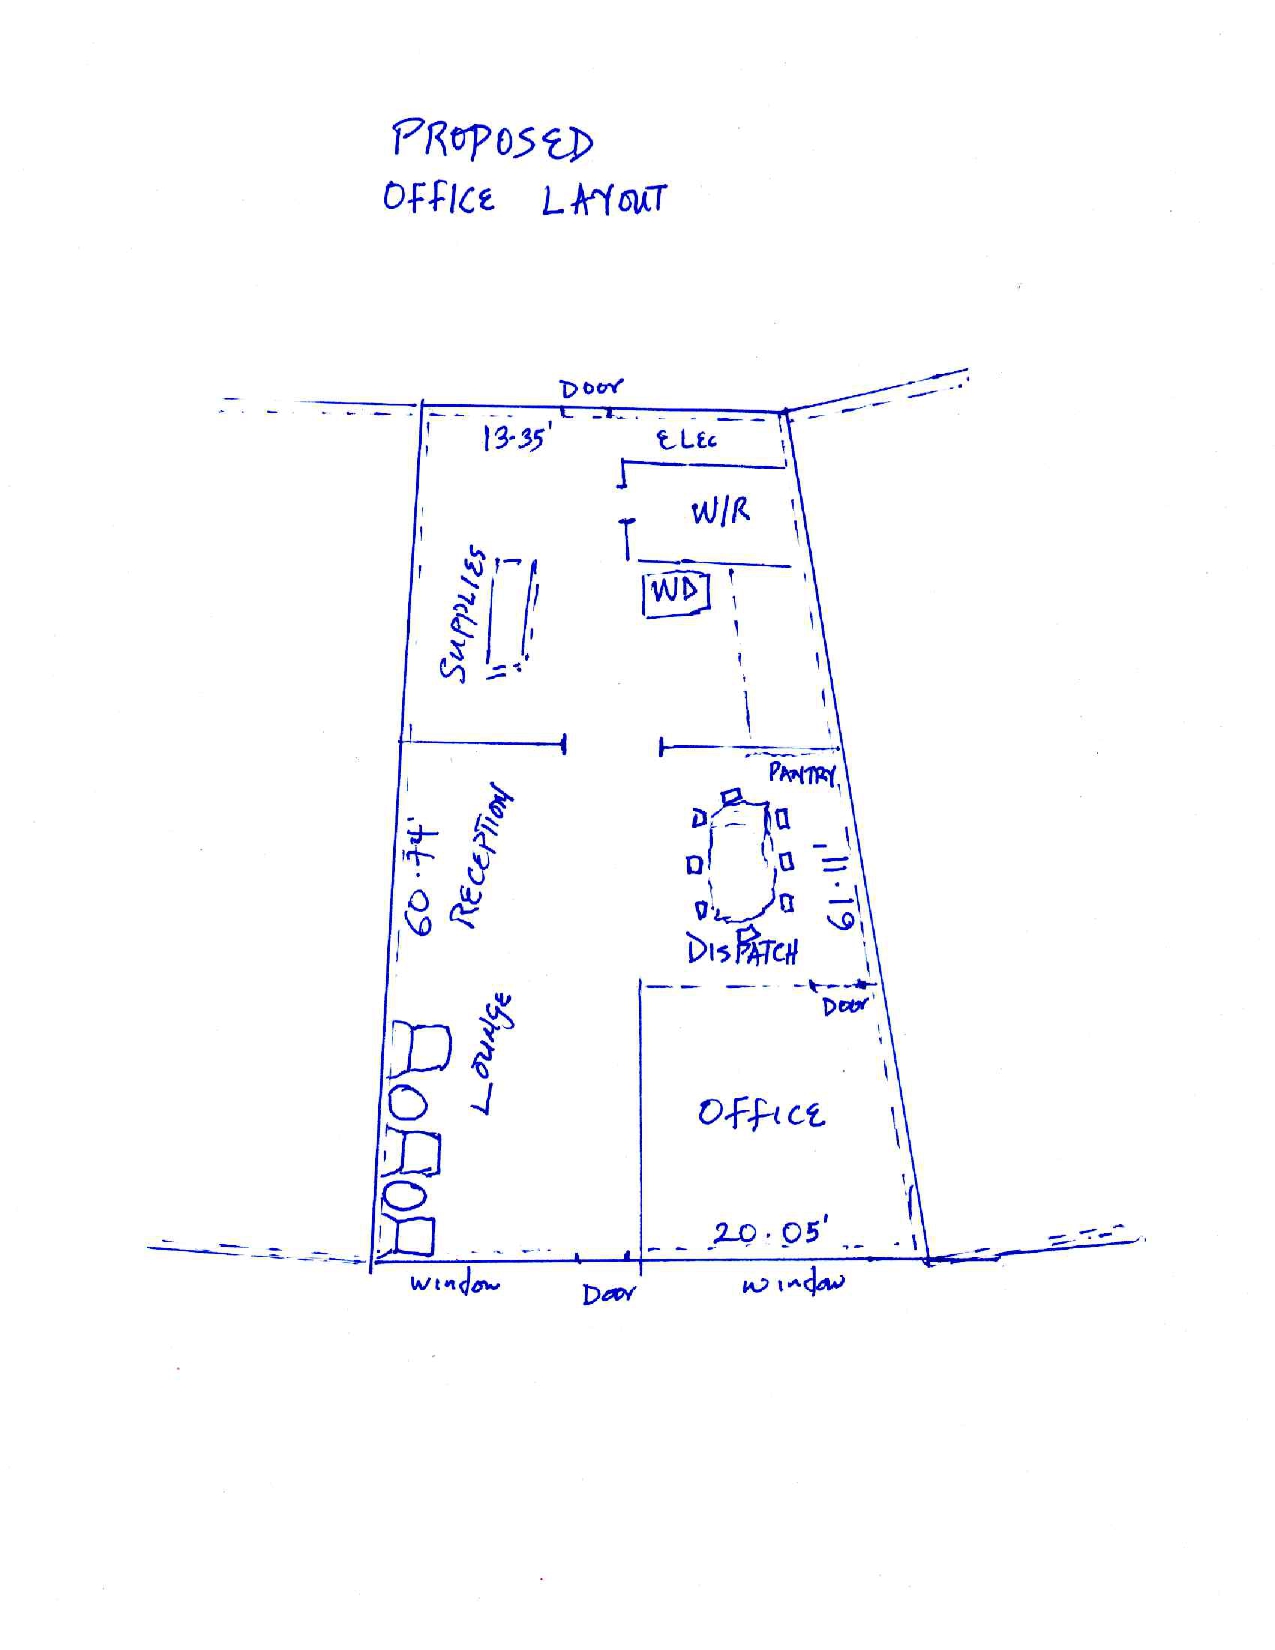 Proposed Office Layout_page-0001